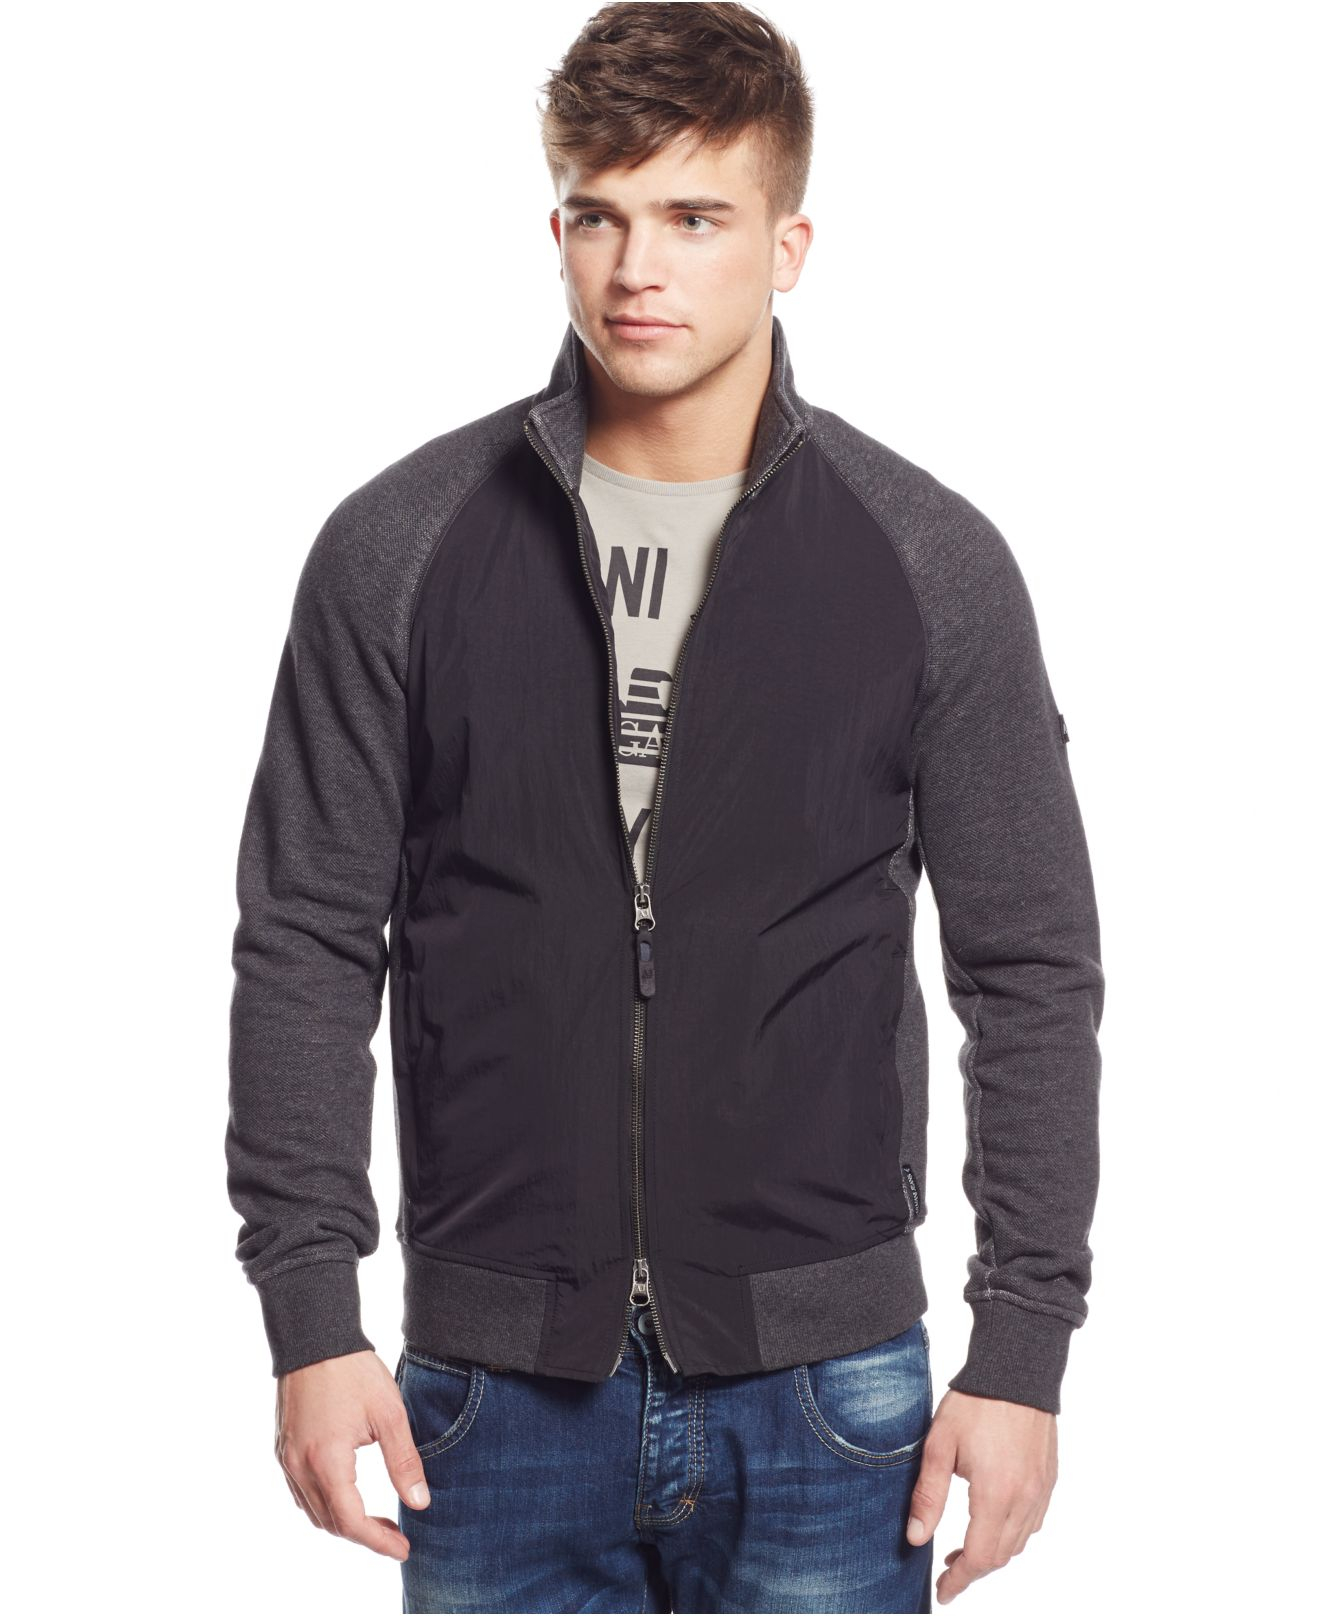 Lyst - Armani Jeans Mixed-media Zip Sweater in Gray for Men